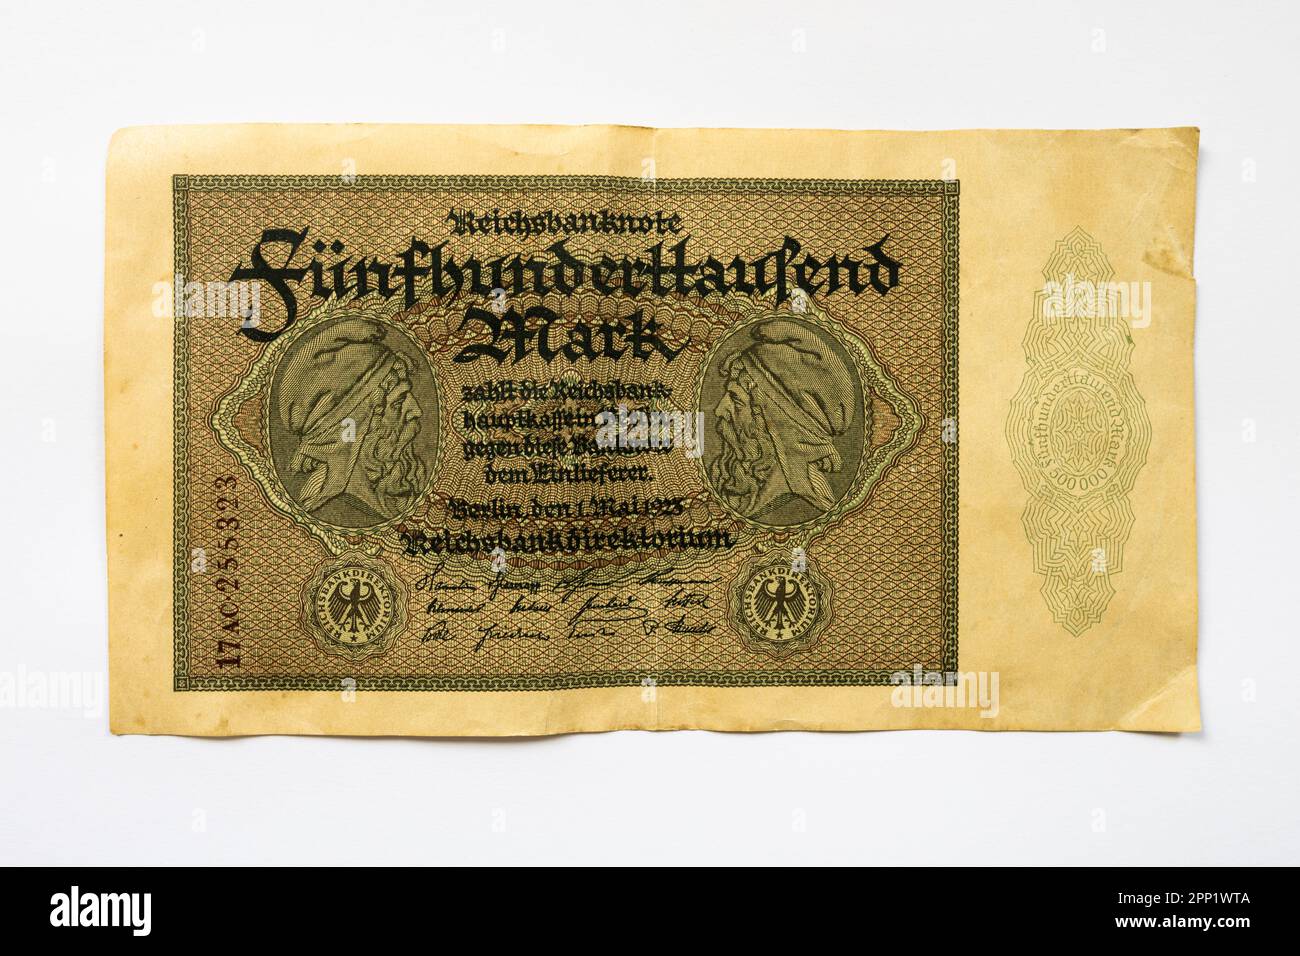 Fünfhunderttausend Mark (five hundred thousand Mark) banknote from the hyperinflation in May 1923. Antique money from the biggest devaluation of cash. Stock Photo